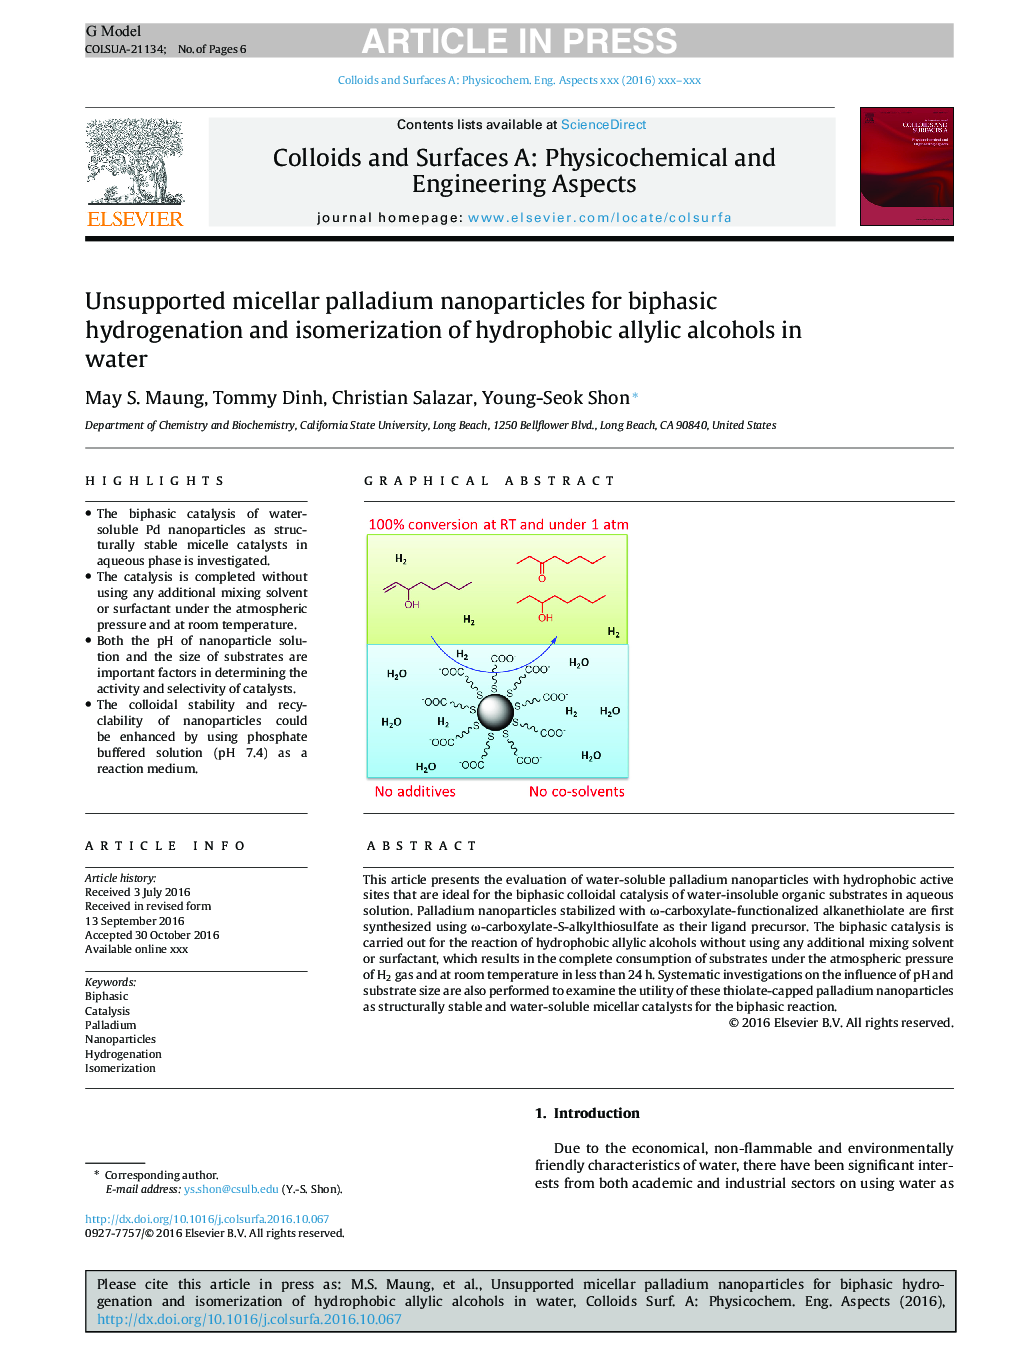 Unsupported micellar palladium nanoparticles for biphasic hydrogenation and isomerization of hydrophobic allylic alcohols in water